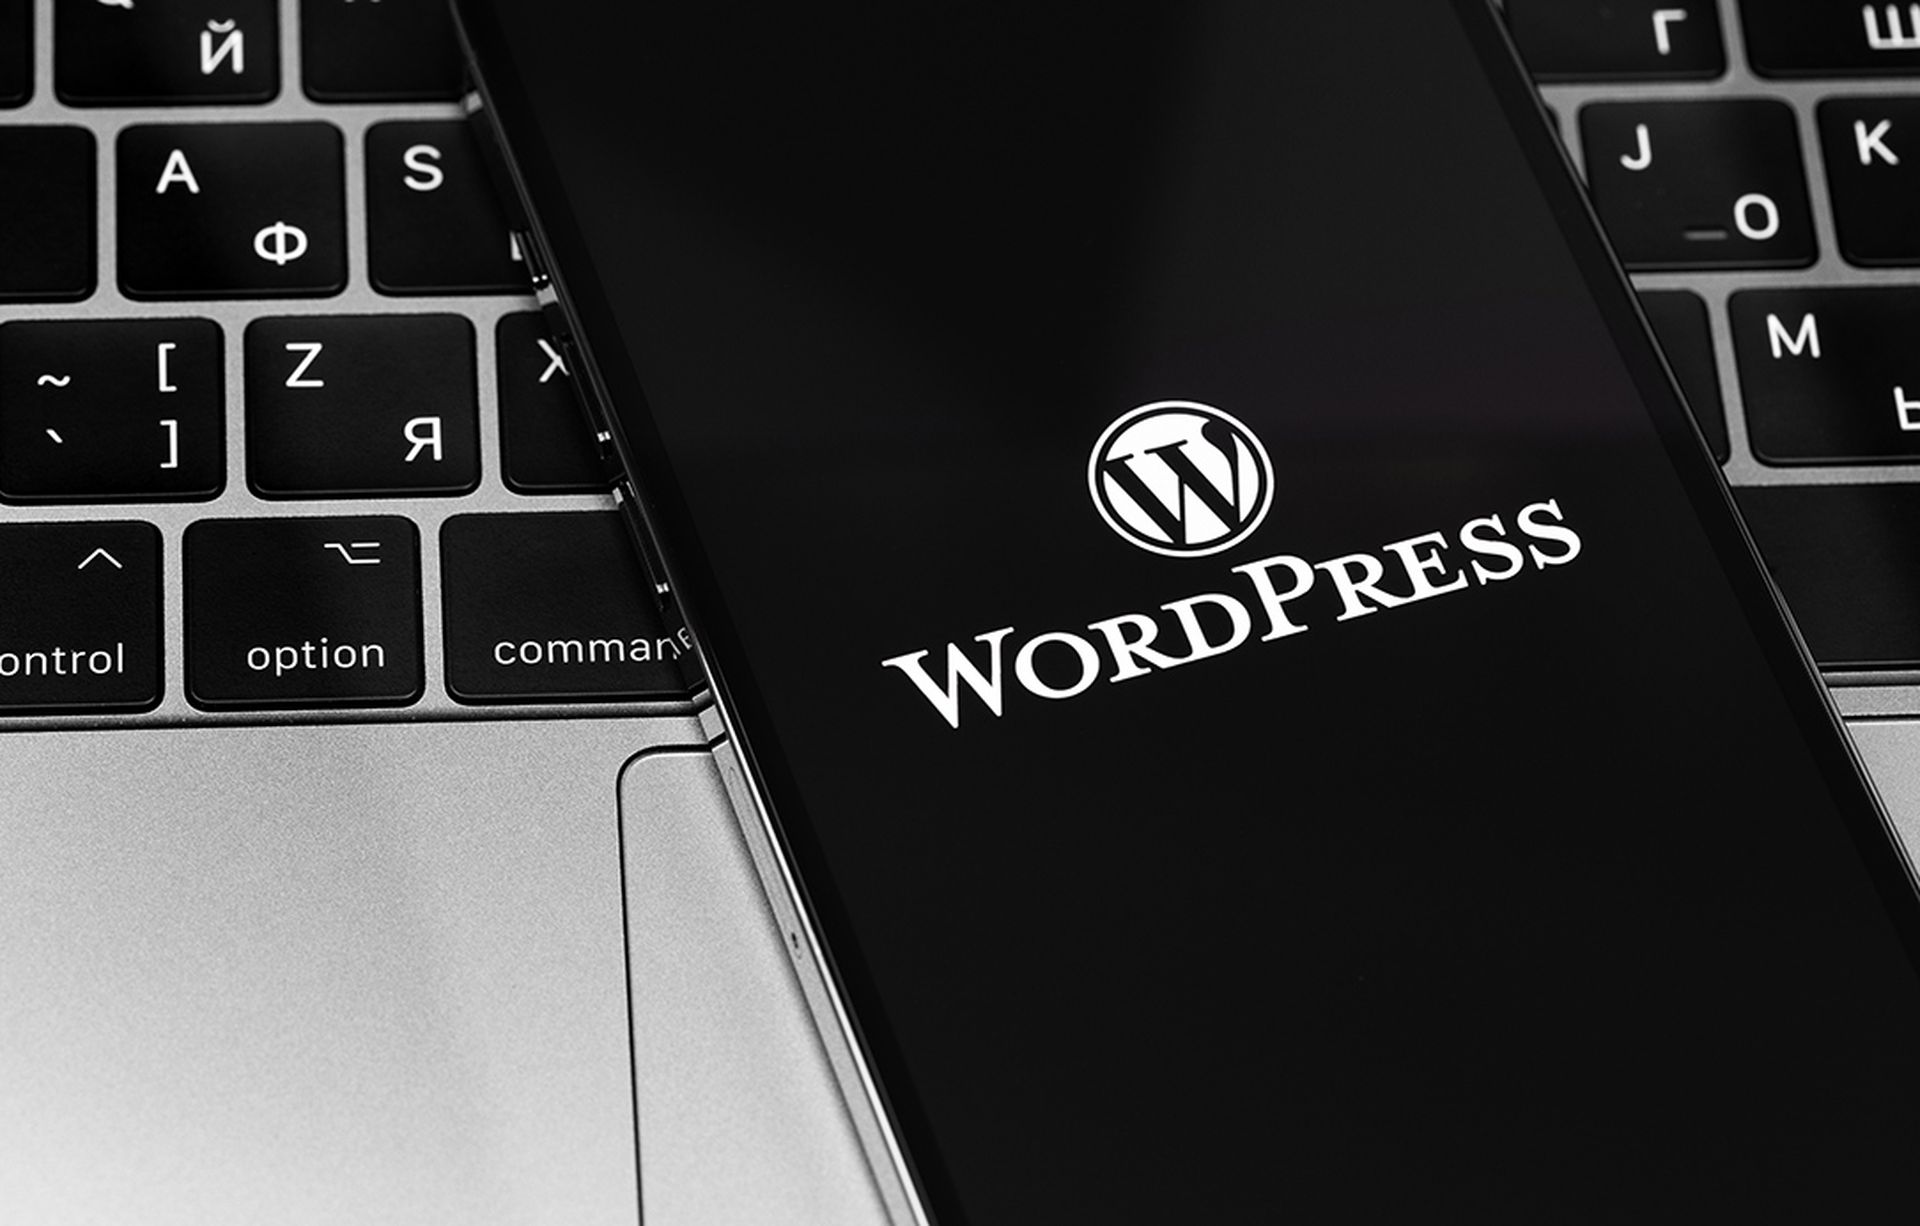 WordPress app logo on the screen smartphone with notebook closeup. WordPress - open source site content management system.